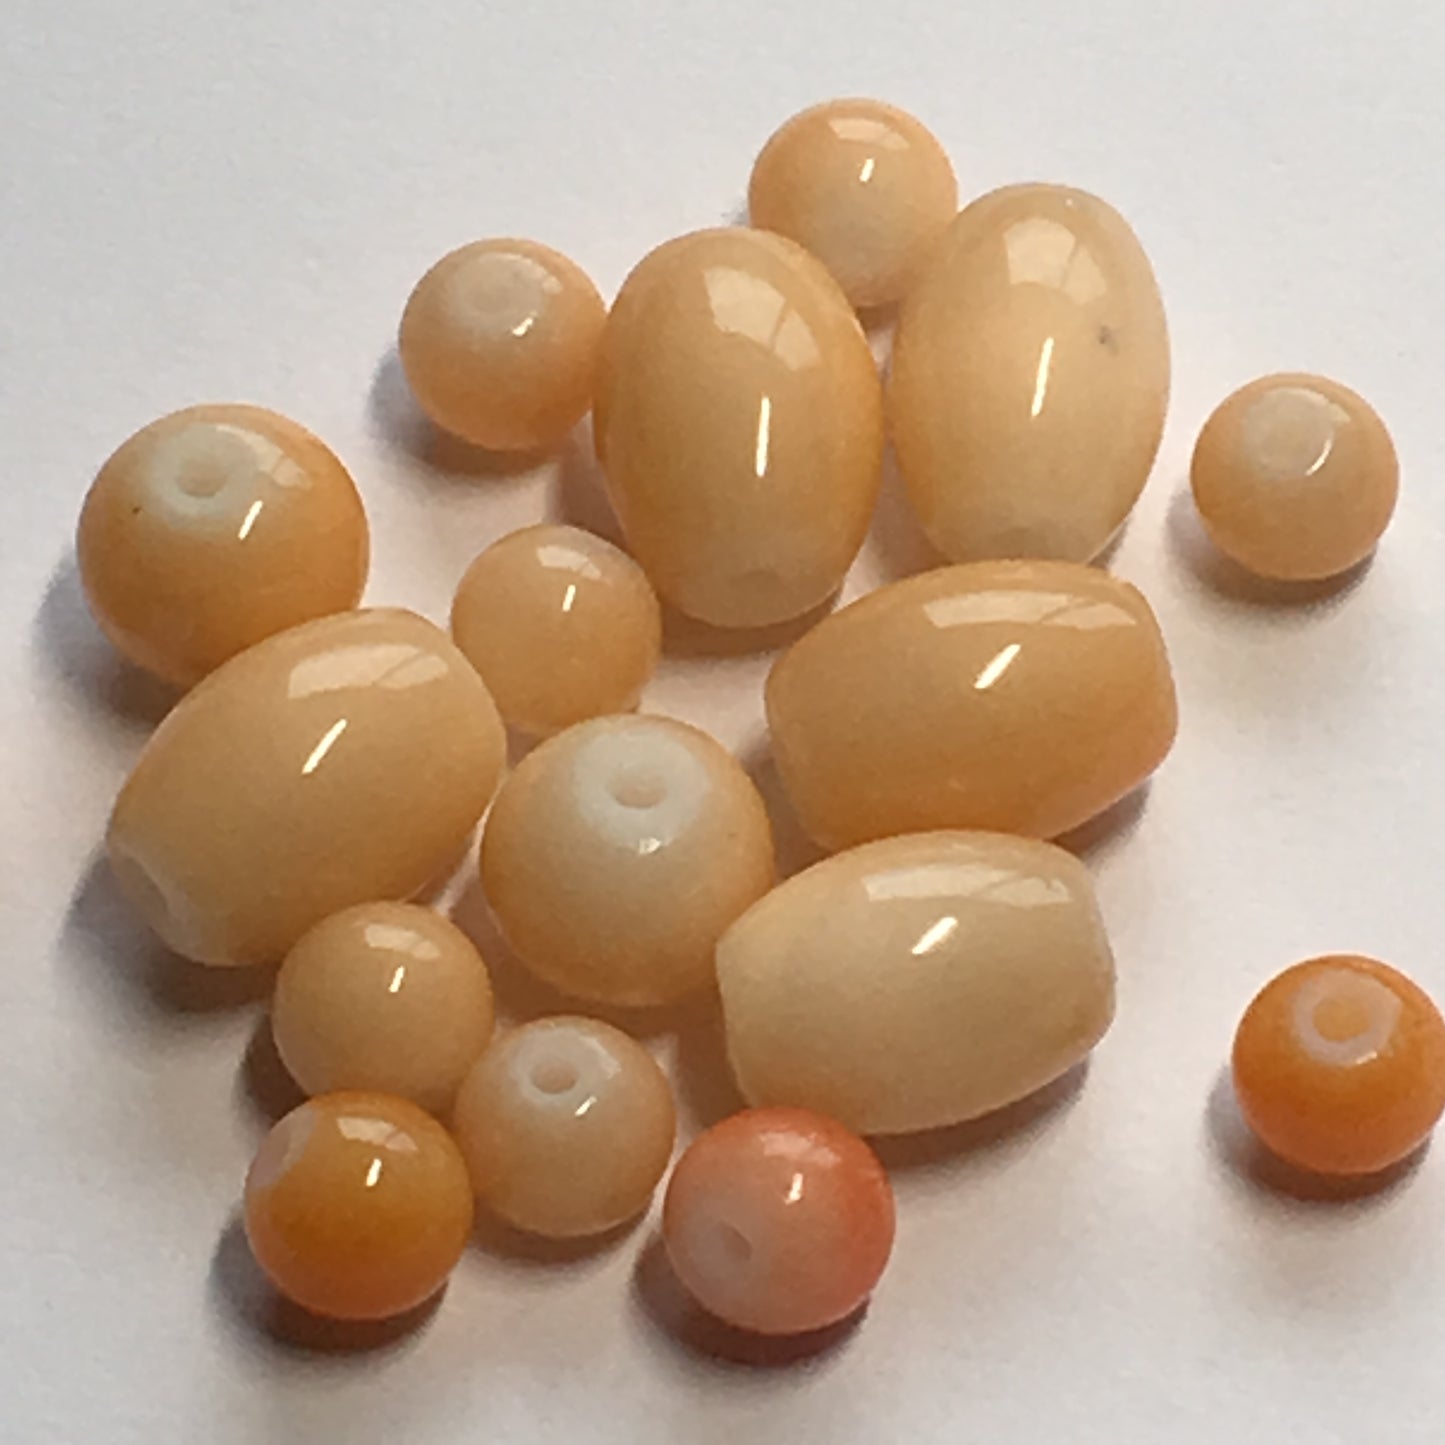 Light Orange Painted Glass Barrel and Round Beads, 11 x 8 mm Barrel, 6 & 8 mm Round, 17 Beads